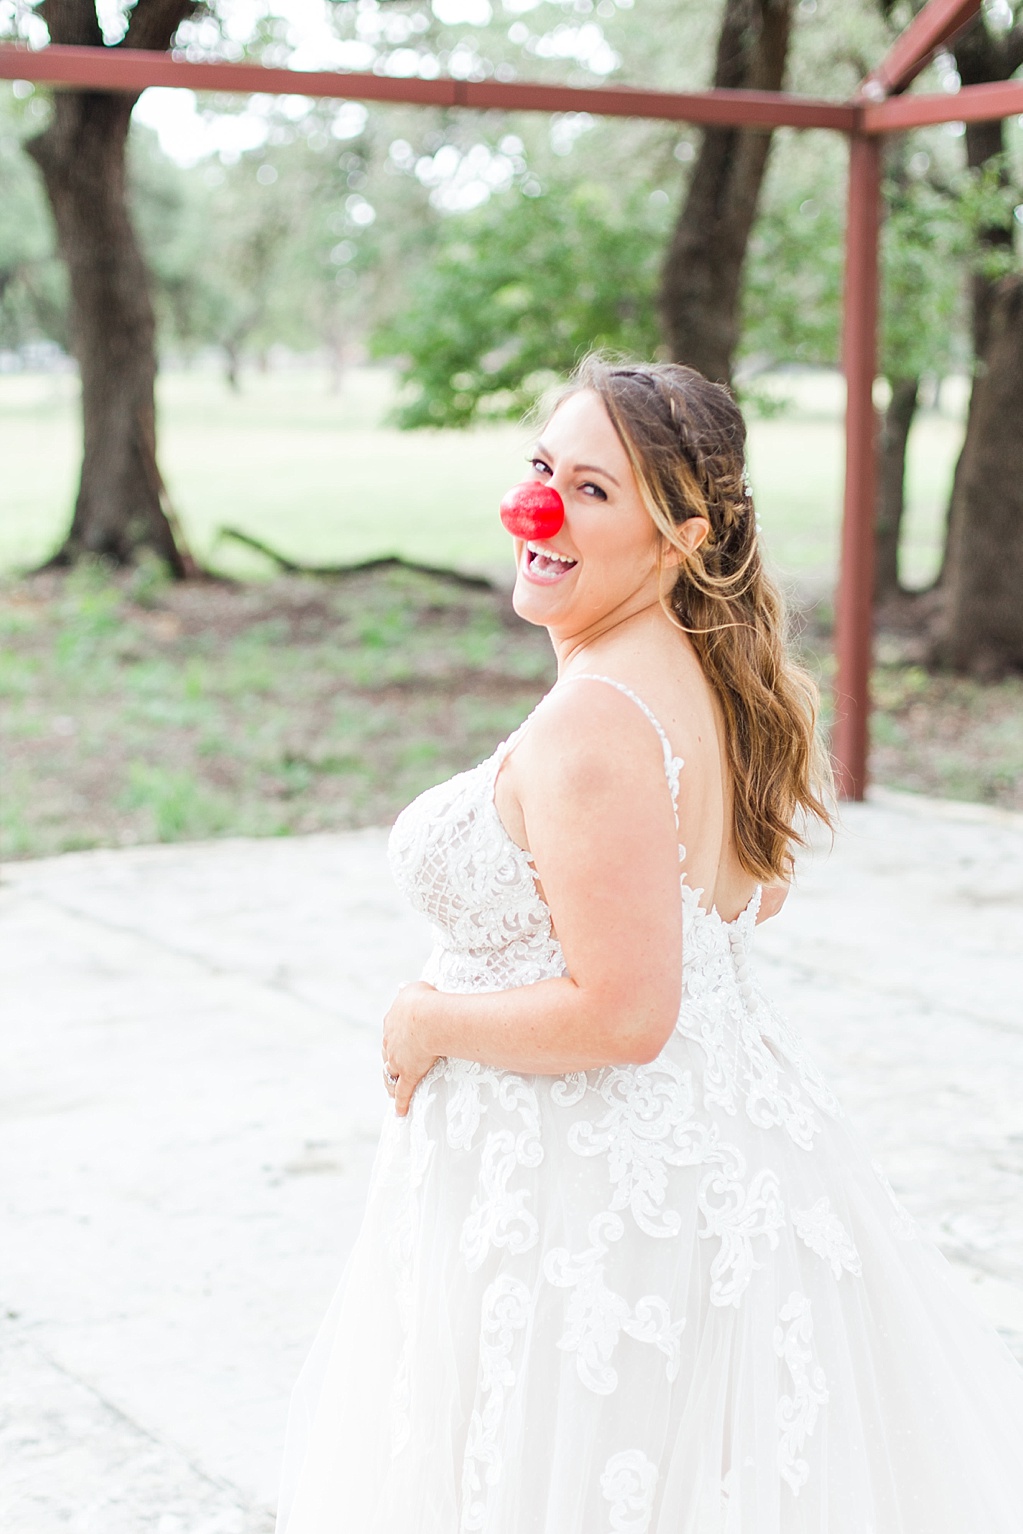 The Oaks at Boerne Wedding Photos by Allison Jeffers Photography 0019